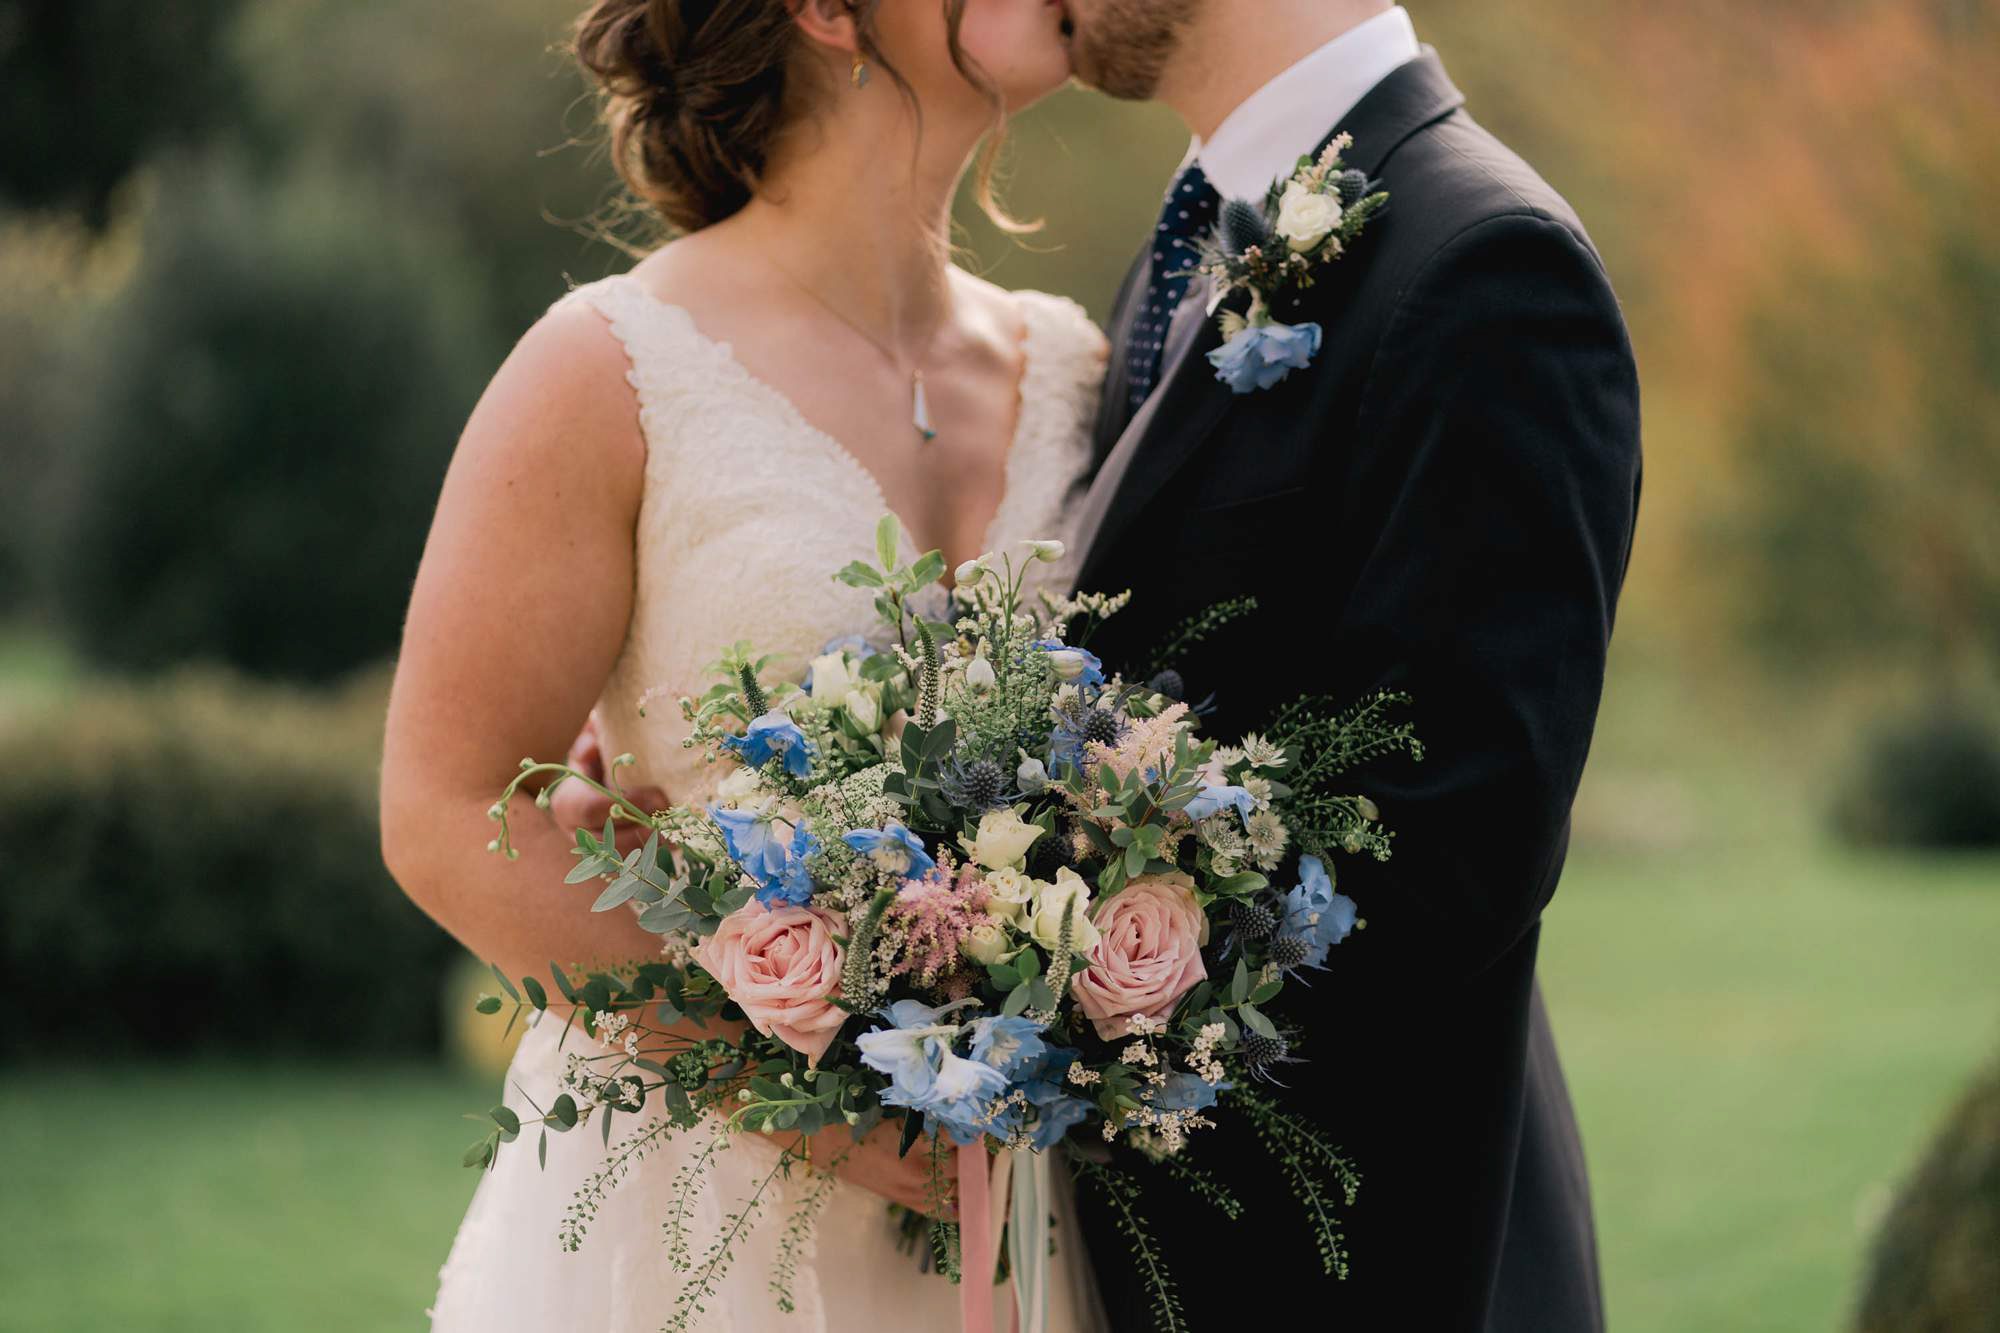 Bride and groom kiss on their wedding day at Salomons Estate in Tunbridge Wells.